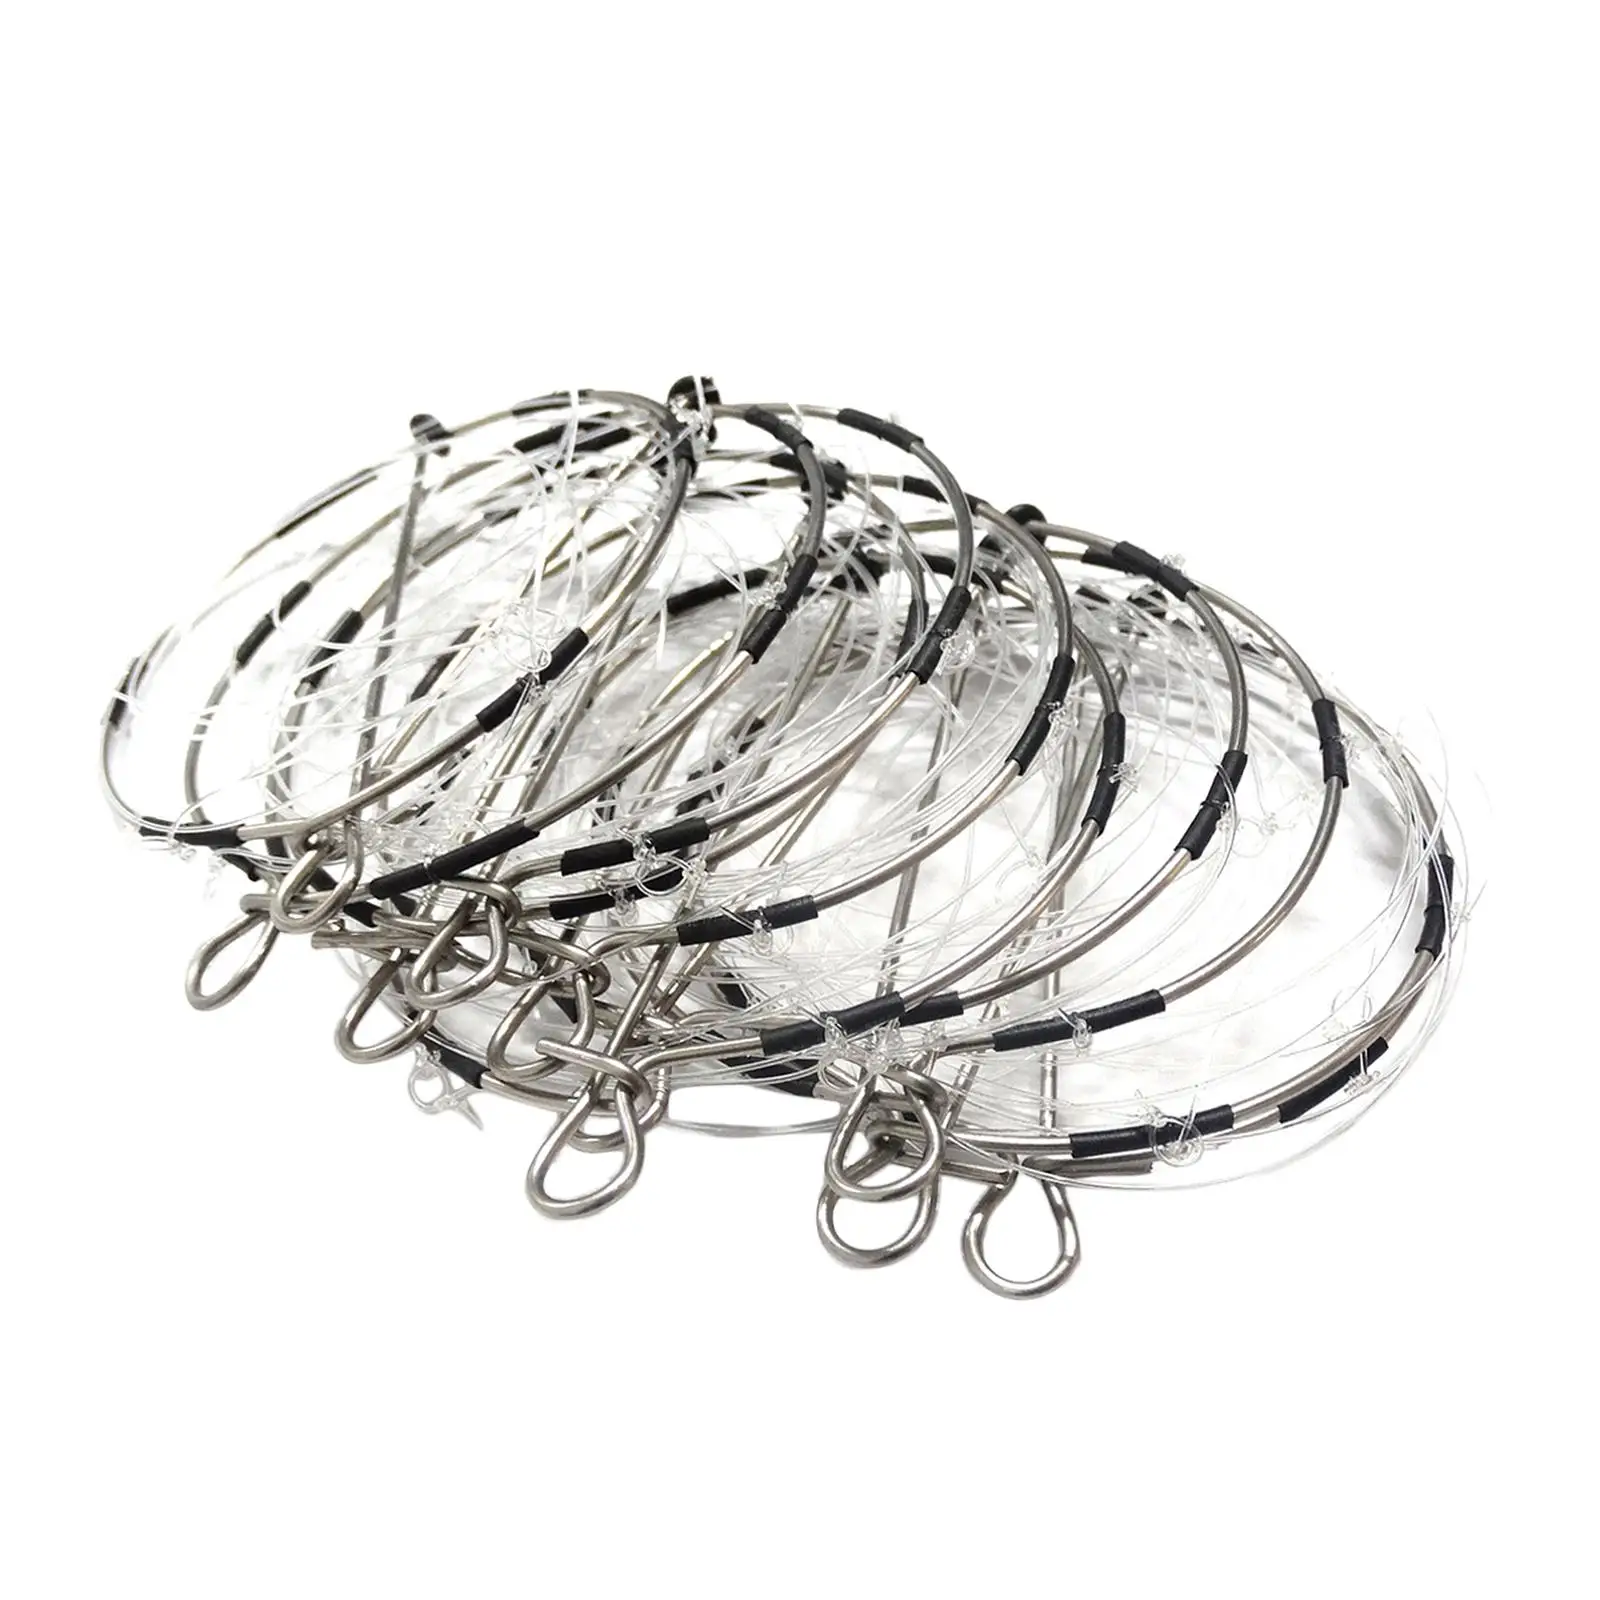 10Pcs Crab Trap Repeated Use 6-ring Portable Steel Catch Crabs Tool Fishing Bait Trap for Lobster Crawdad shrimp Crawfish Rivers